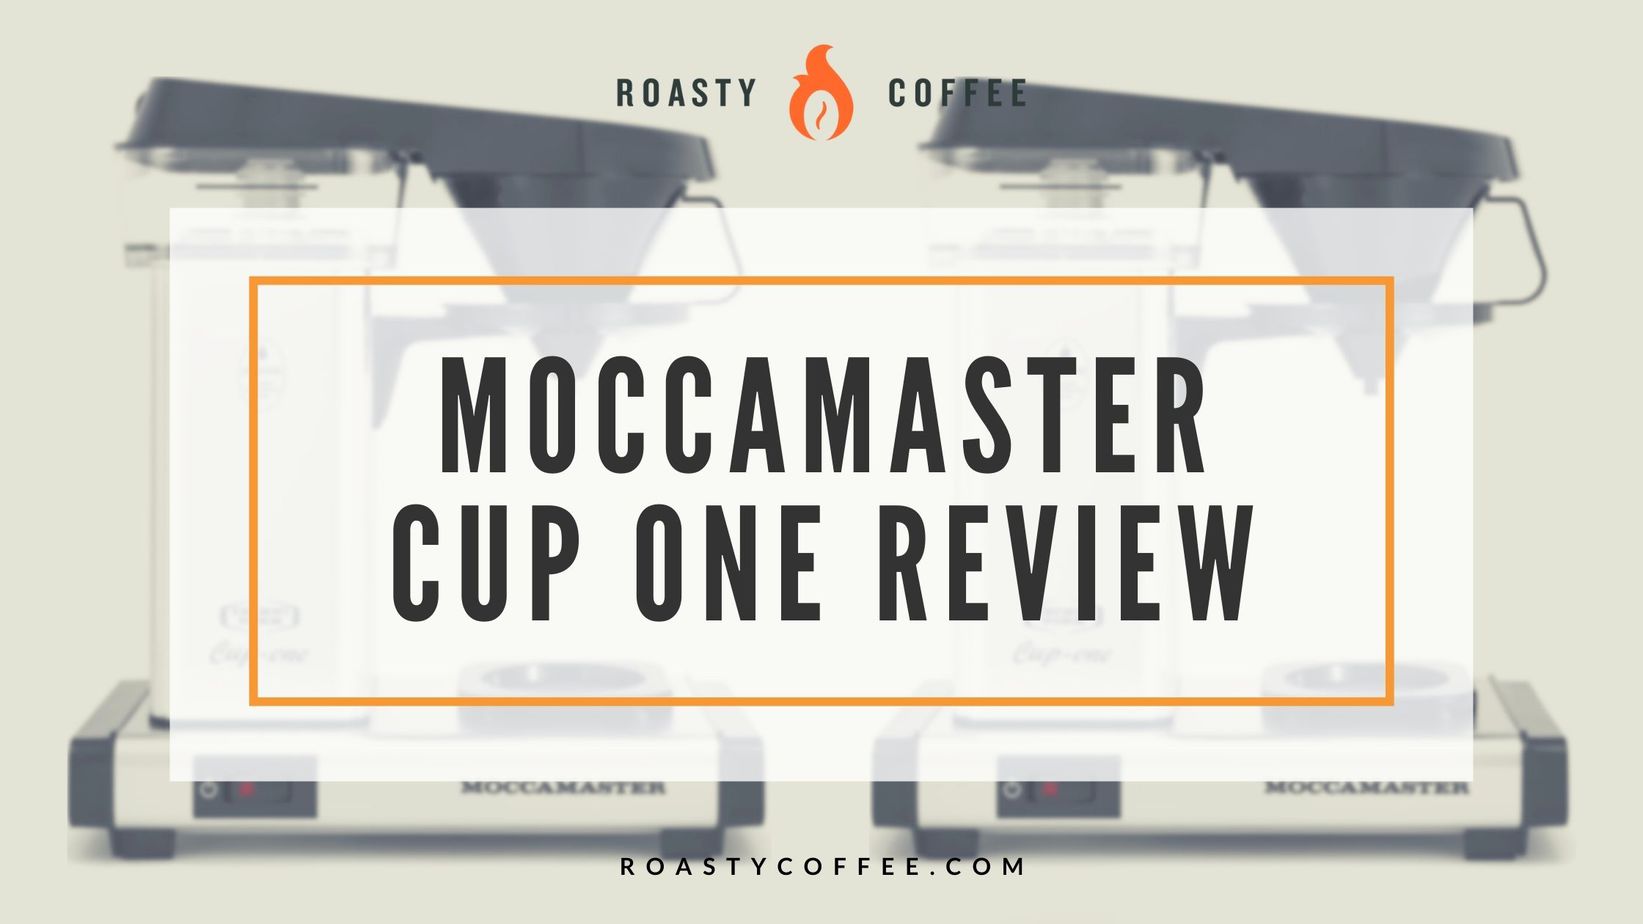 Moccamaster Cup-one ad (FI), Orange, Cupponen Sinulle